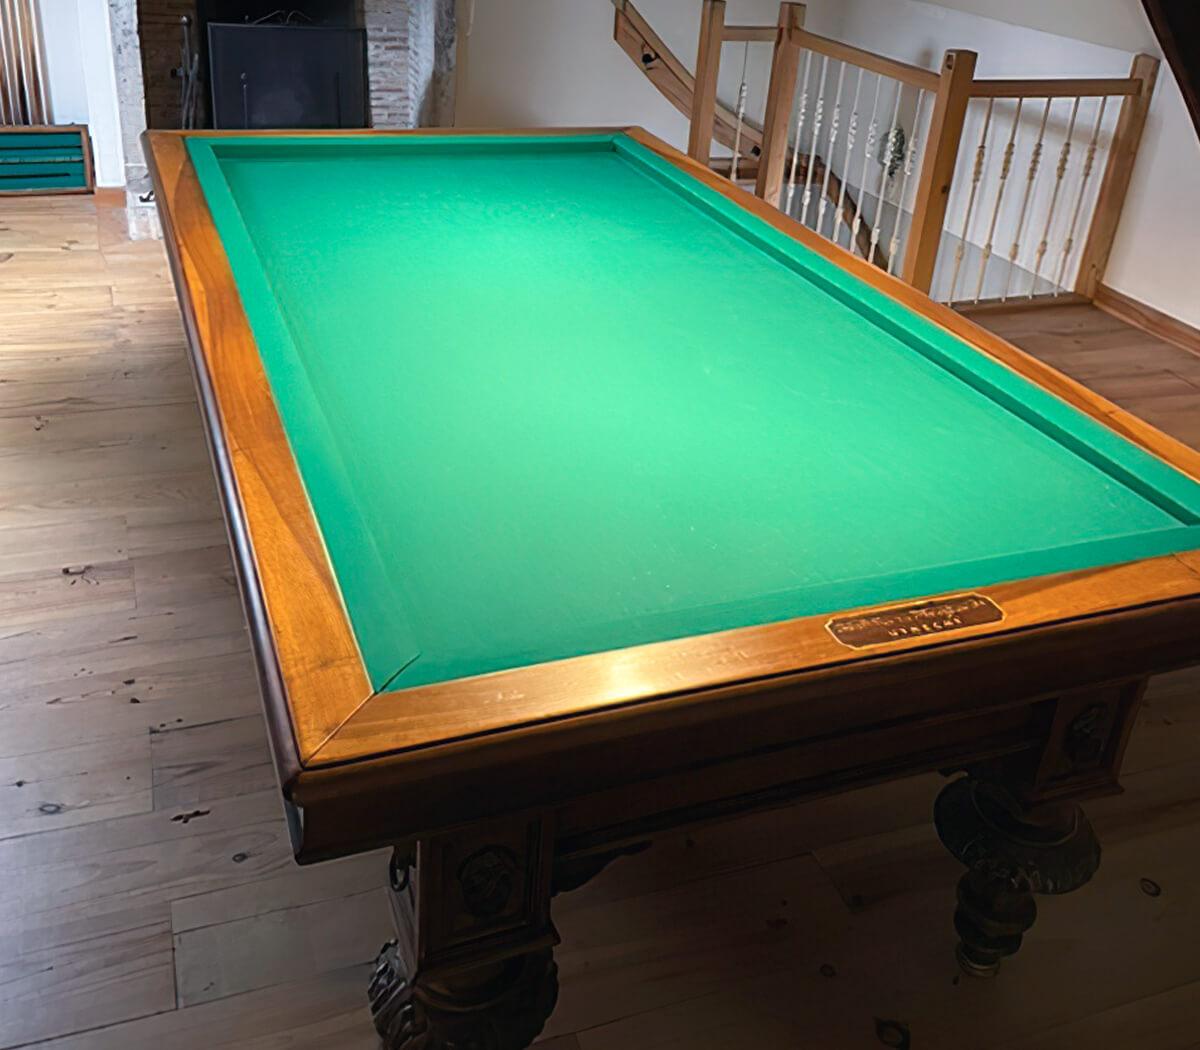 H.D. van der Meijden professionally heated billiard table with accessories. 
Classic, antique cafe billiards. Made from solid hardwood legs and frame. 
The billiard table is a classic and robust 4-legged model.
In very good condition!